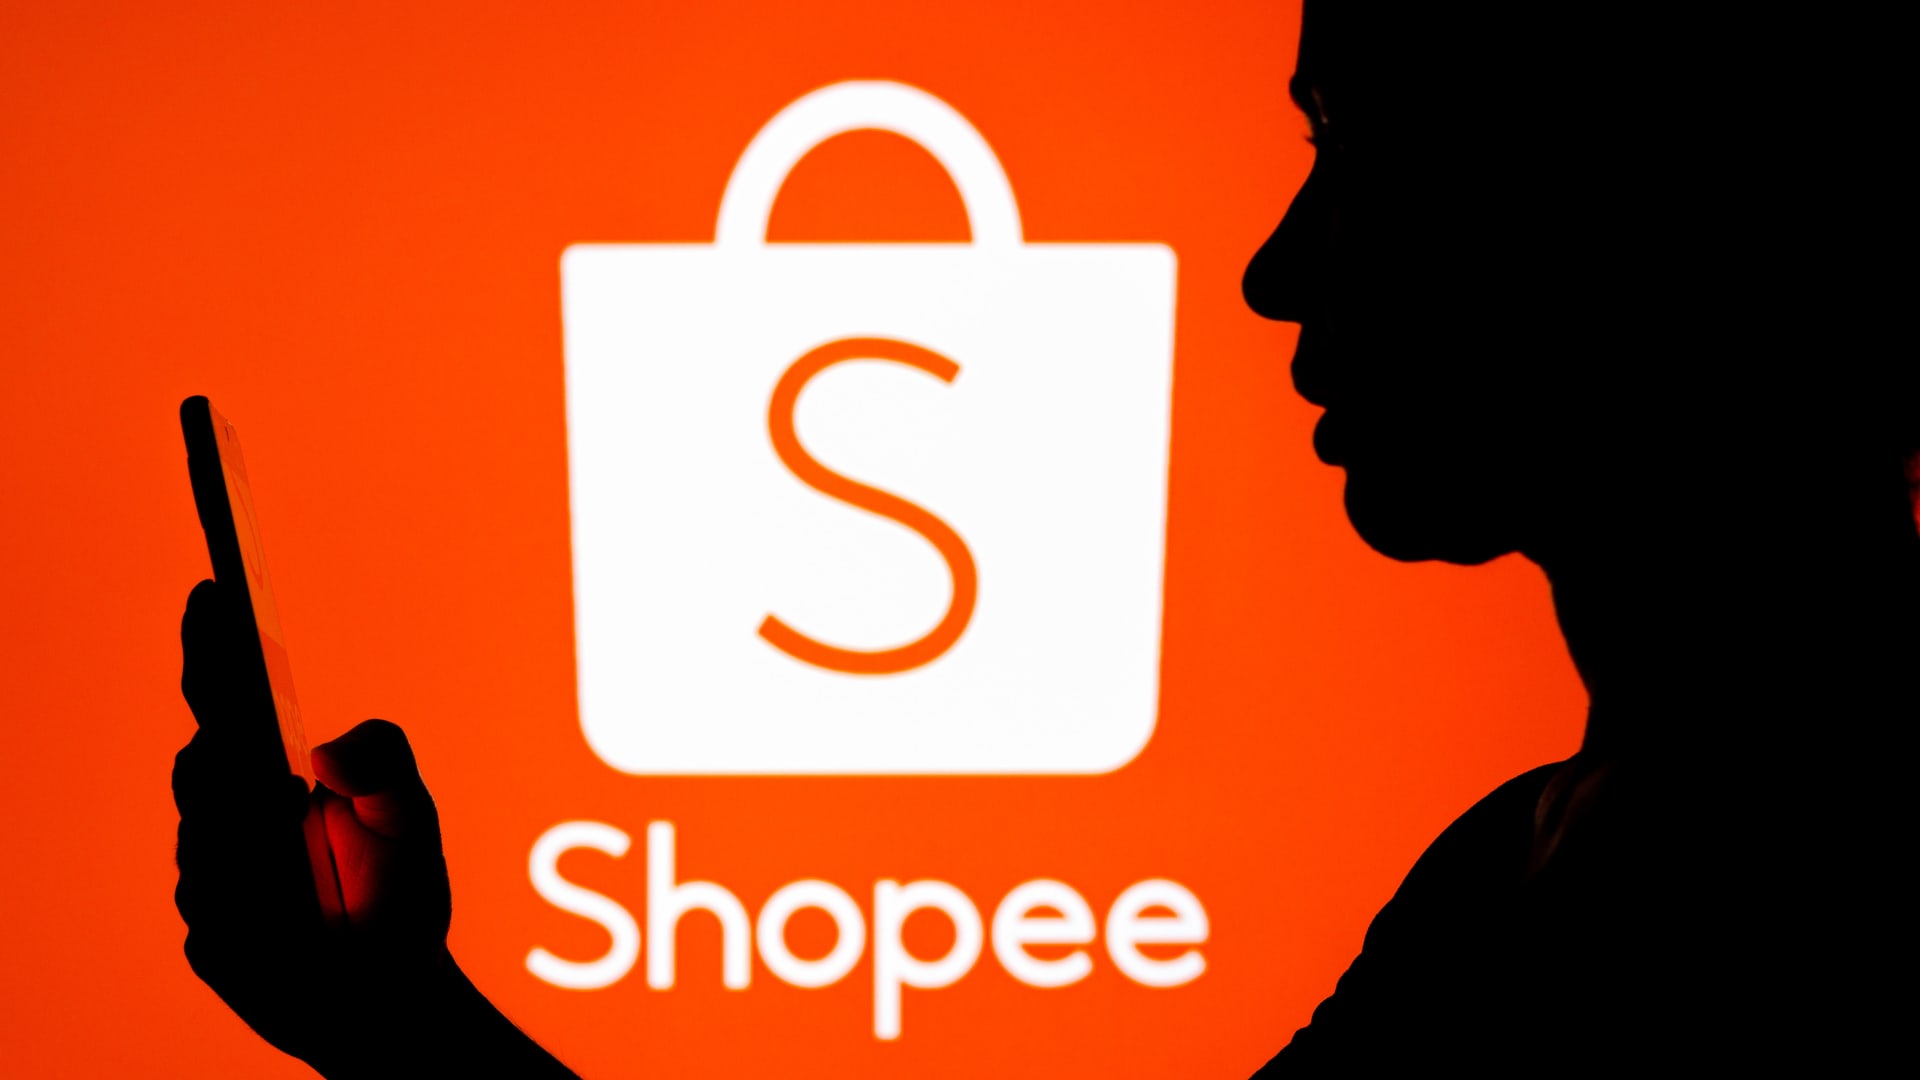 E-commerce firm Shopee admitted to violating competition law, agreed to adjust its practices, Indonesia says